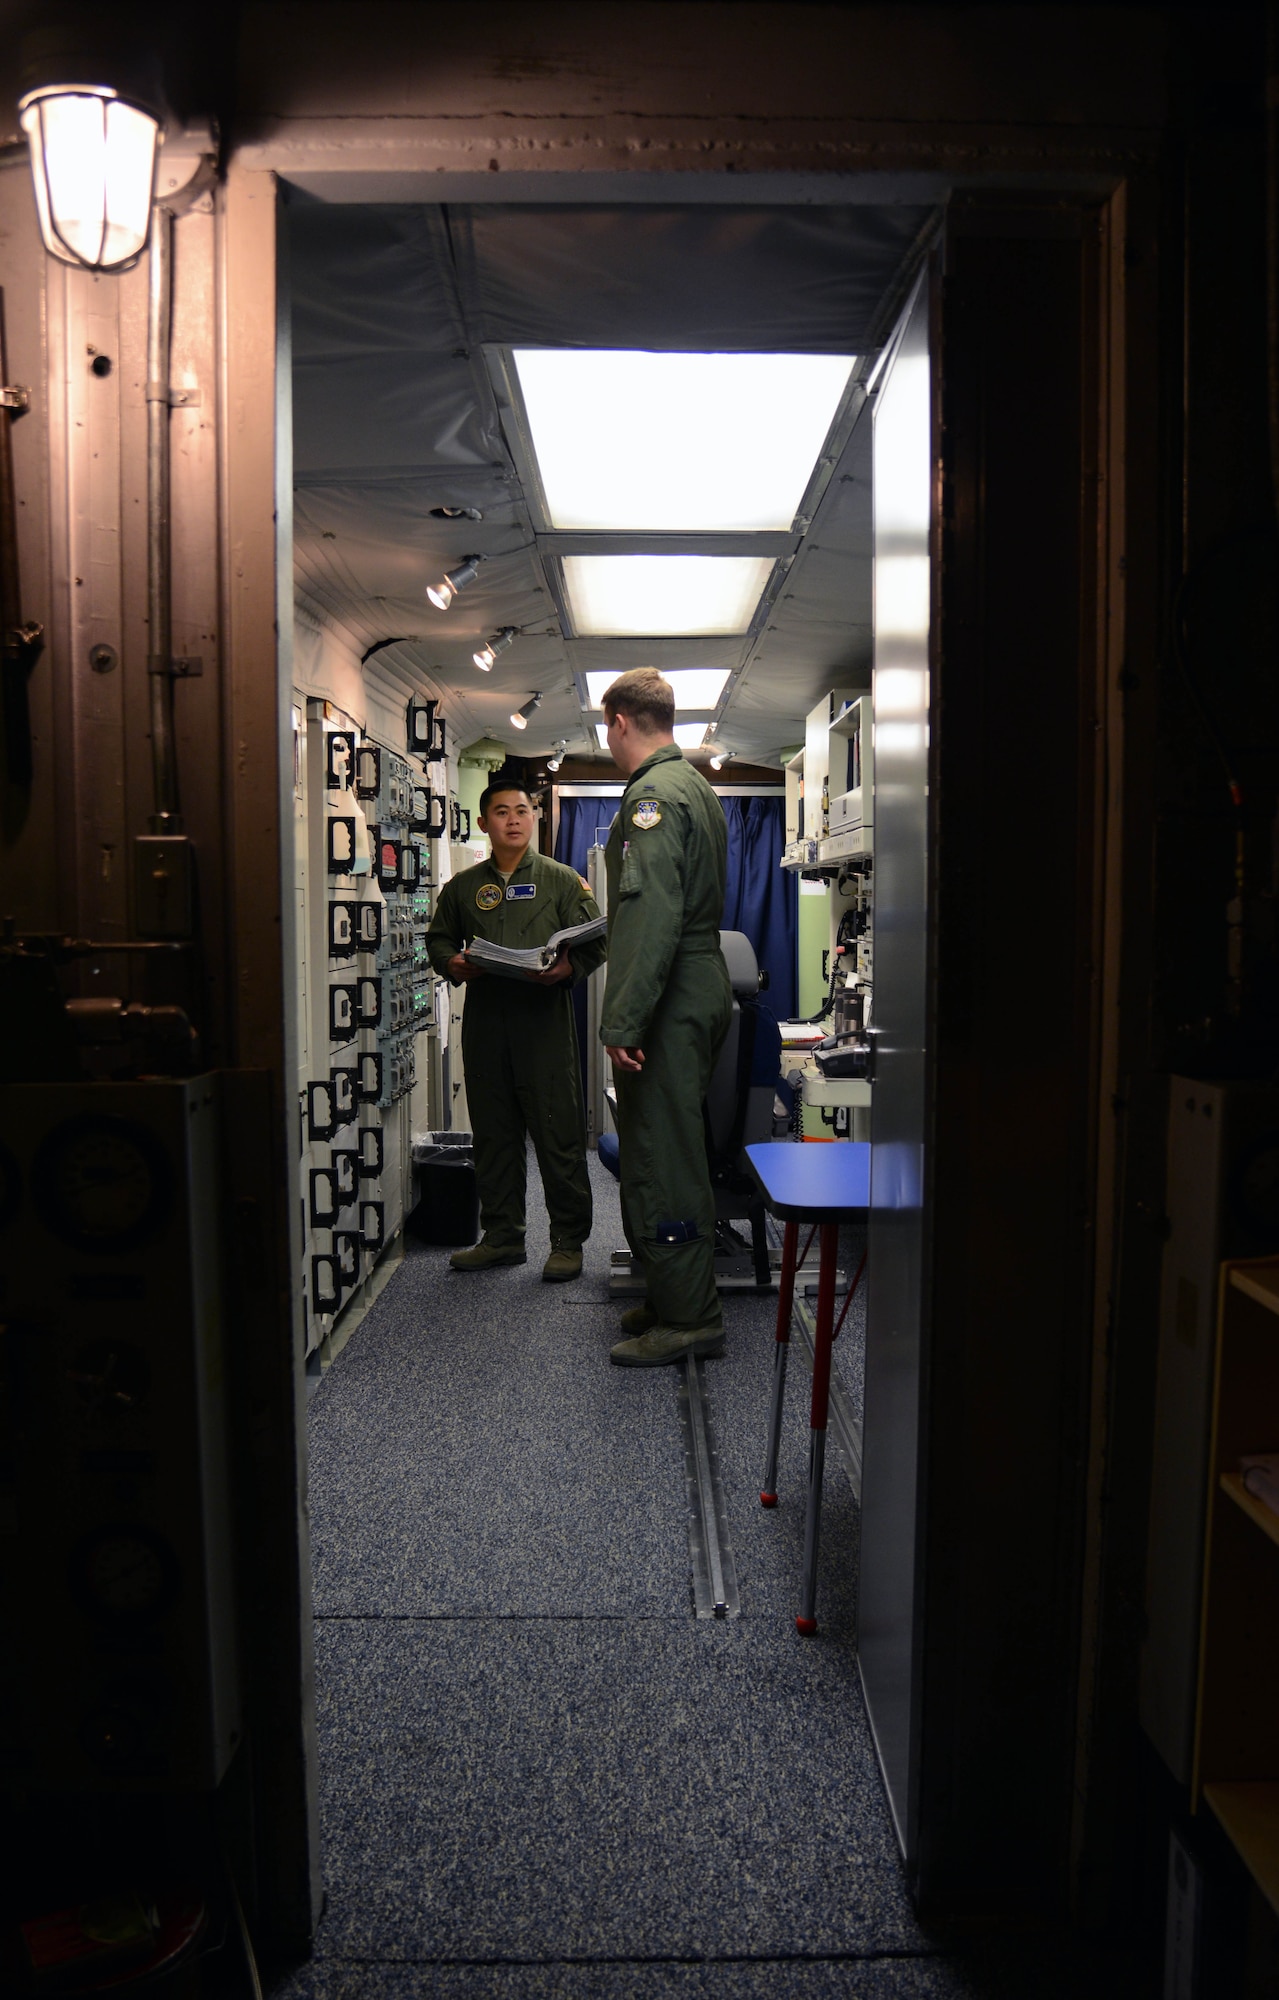 1st Lt. Tony Onitsuka, left, 10th Missile Squadron flight commander, and 1st Lt. Will Coley, 10th MS deputy flight commander, check the status of their communications equipment March 16, 2015, at a launch control center near Malmstrom Air Force Base, Mont. Regular maintenance and checks are required to ensure there is a stable communications network to the LCC. (U.S. Air Force photo/ Airman 1st Class Dillon Johnston)